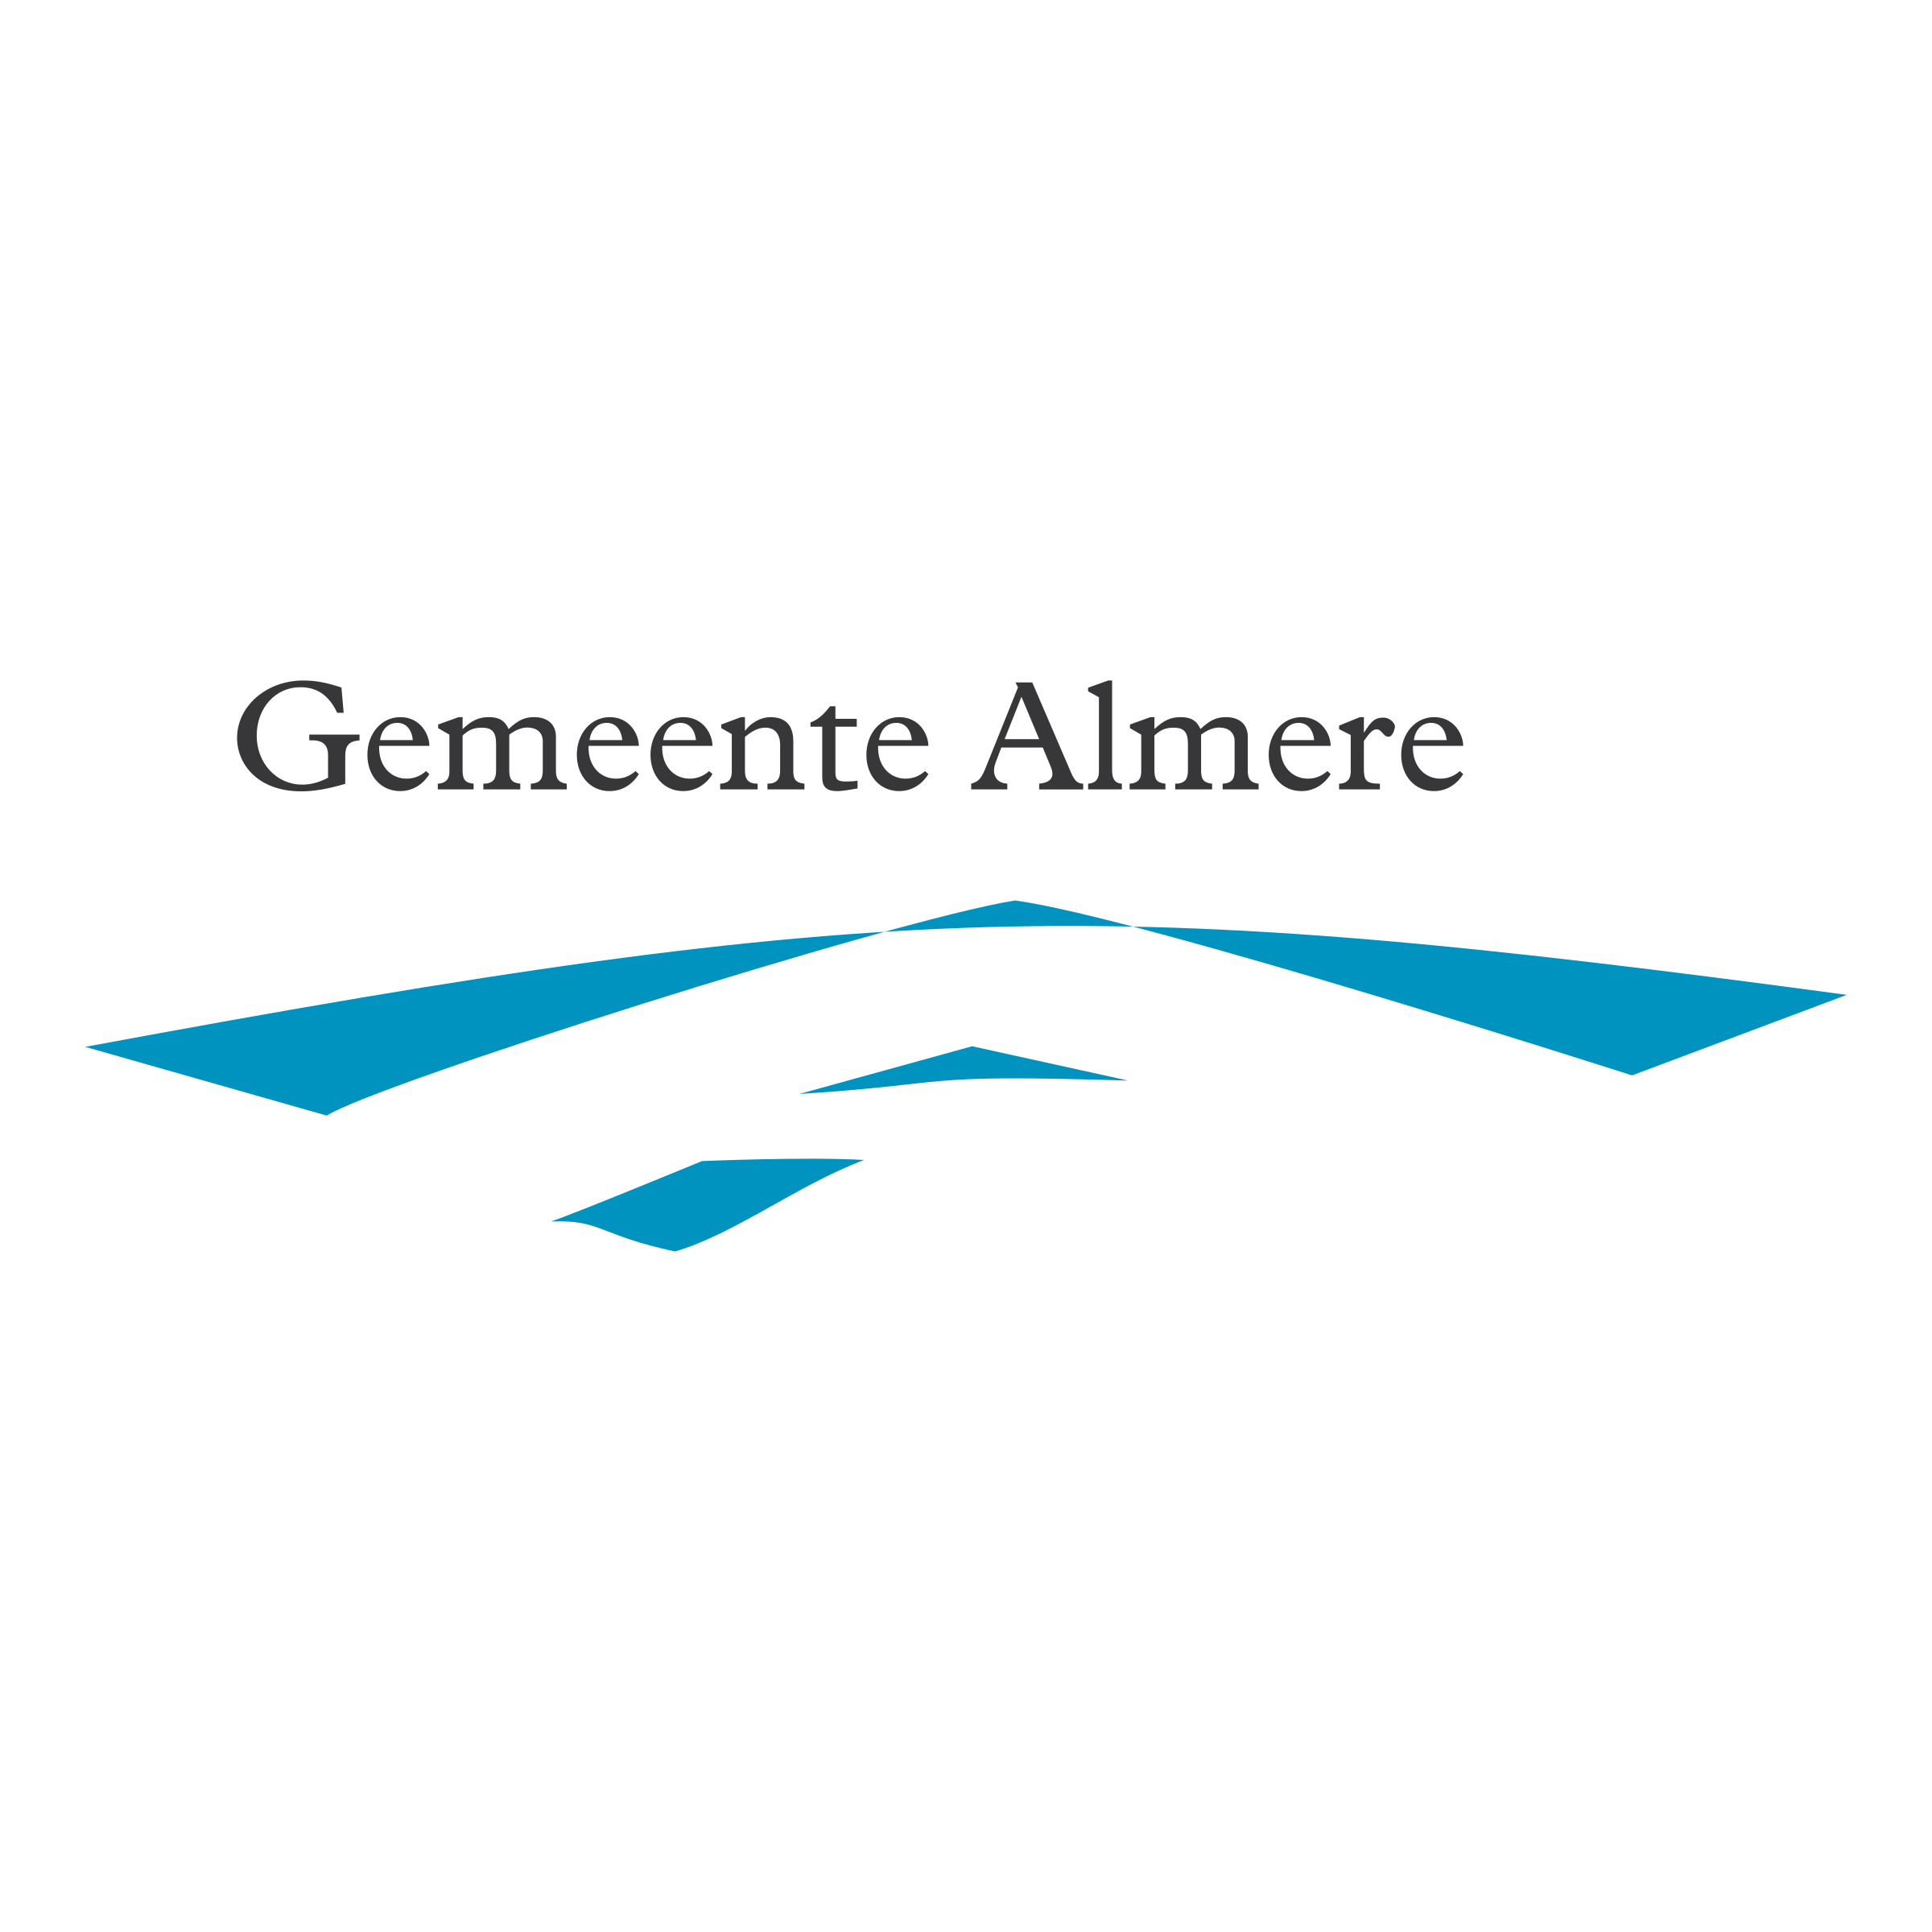 Logo van friendly name of tenant for use in templates, e.g. Gemeente Finveen